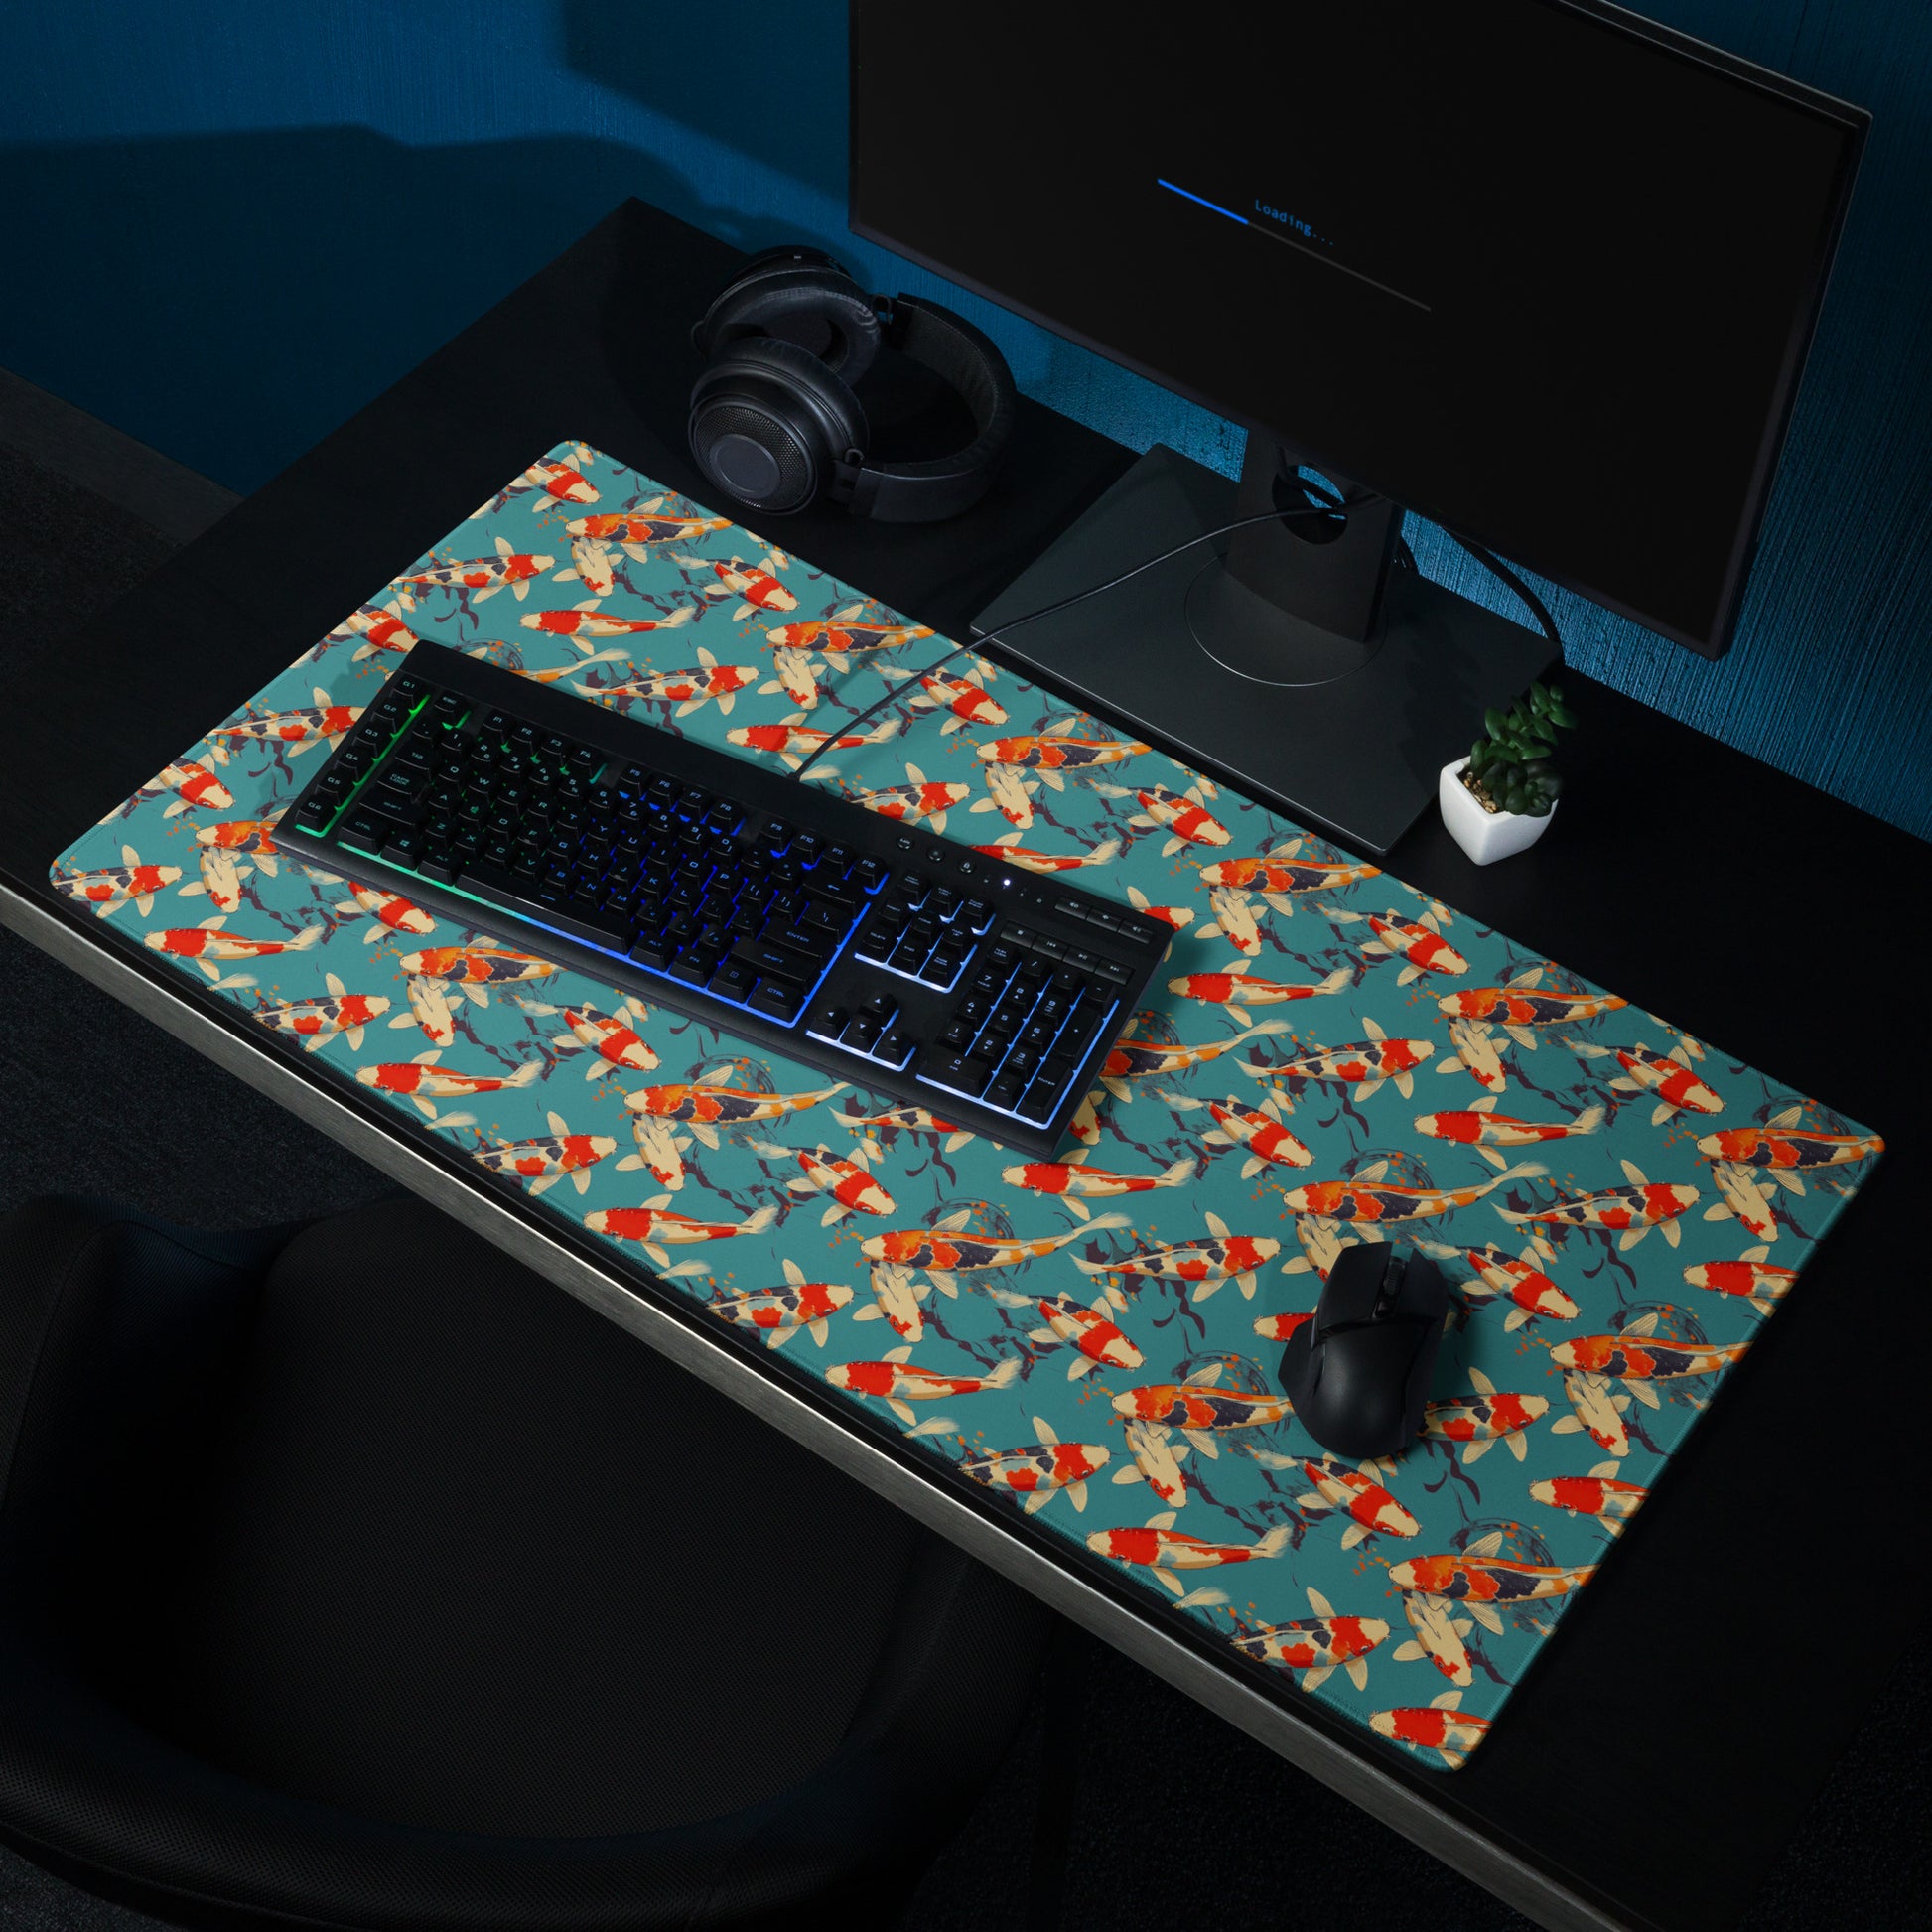 A 36" x 18" gaming desk pad with red koi fish on a blue background sitting on a desk. A keyboard and mouse sit on top of it.